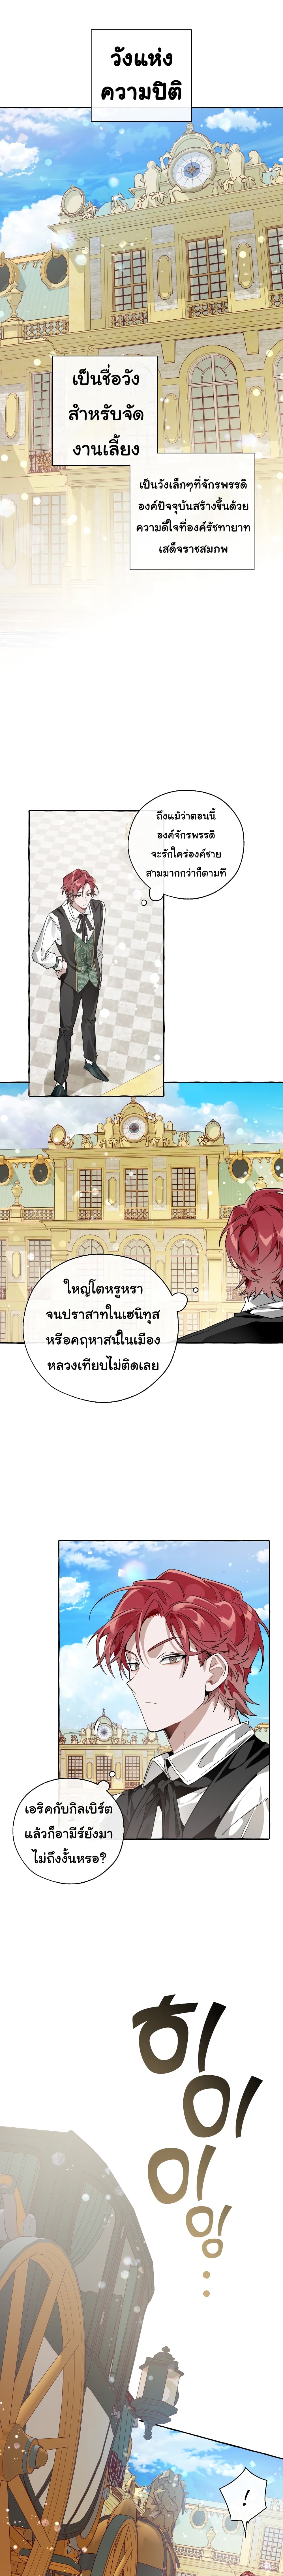 Trash Of The Counts Family 44 แปลไทย